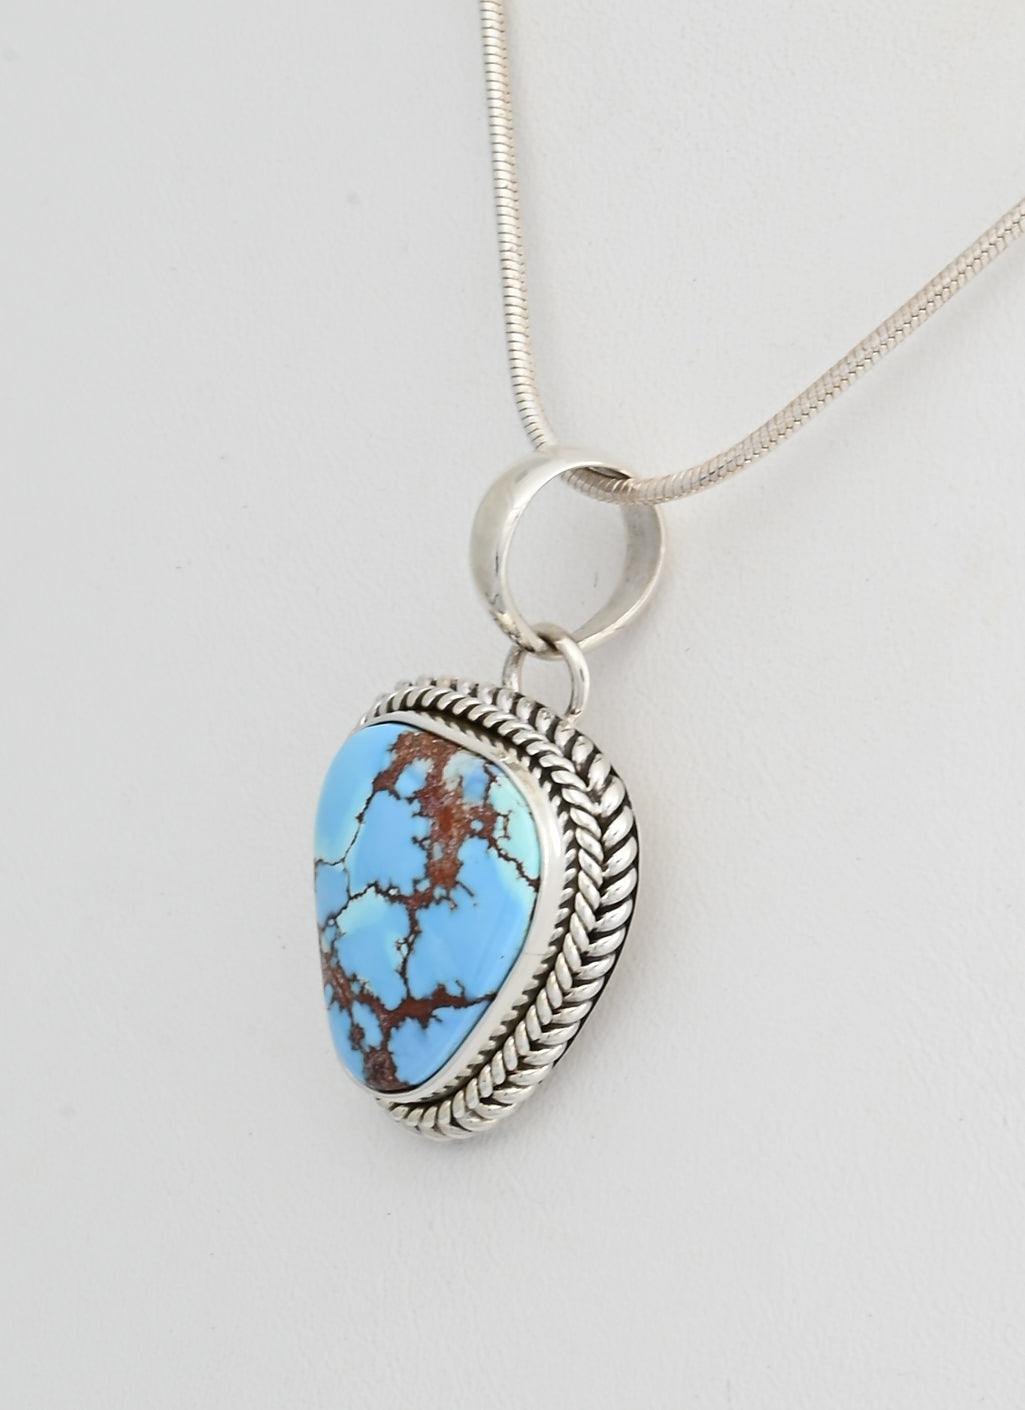 Pendant with Golden Hills Turquoise Pendant by Artie Yellowhorse